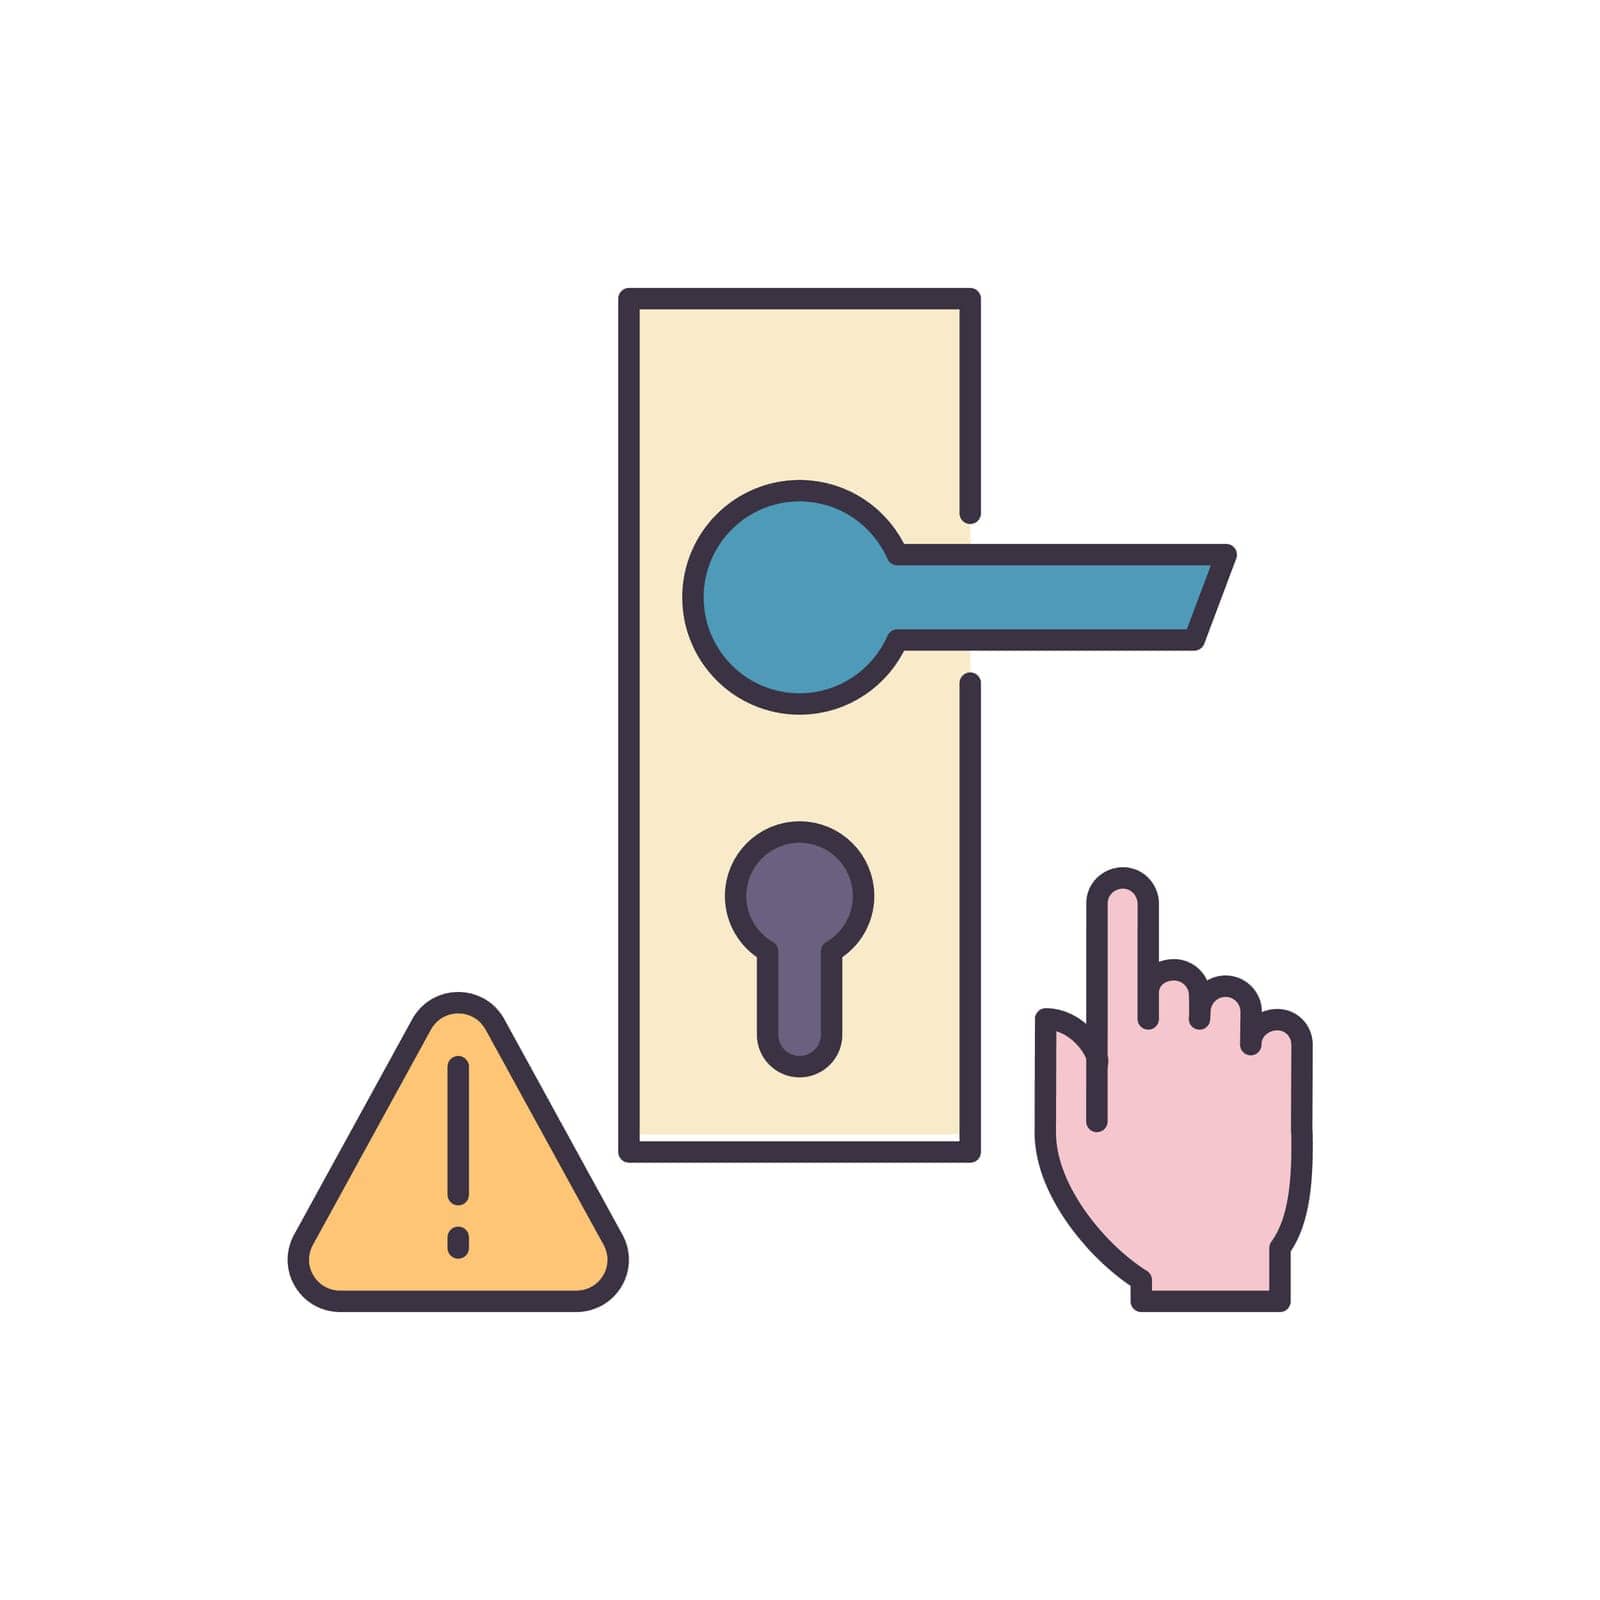 Do not touch door handle related vector icon by smoki